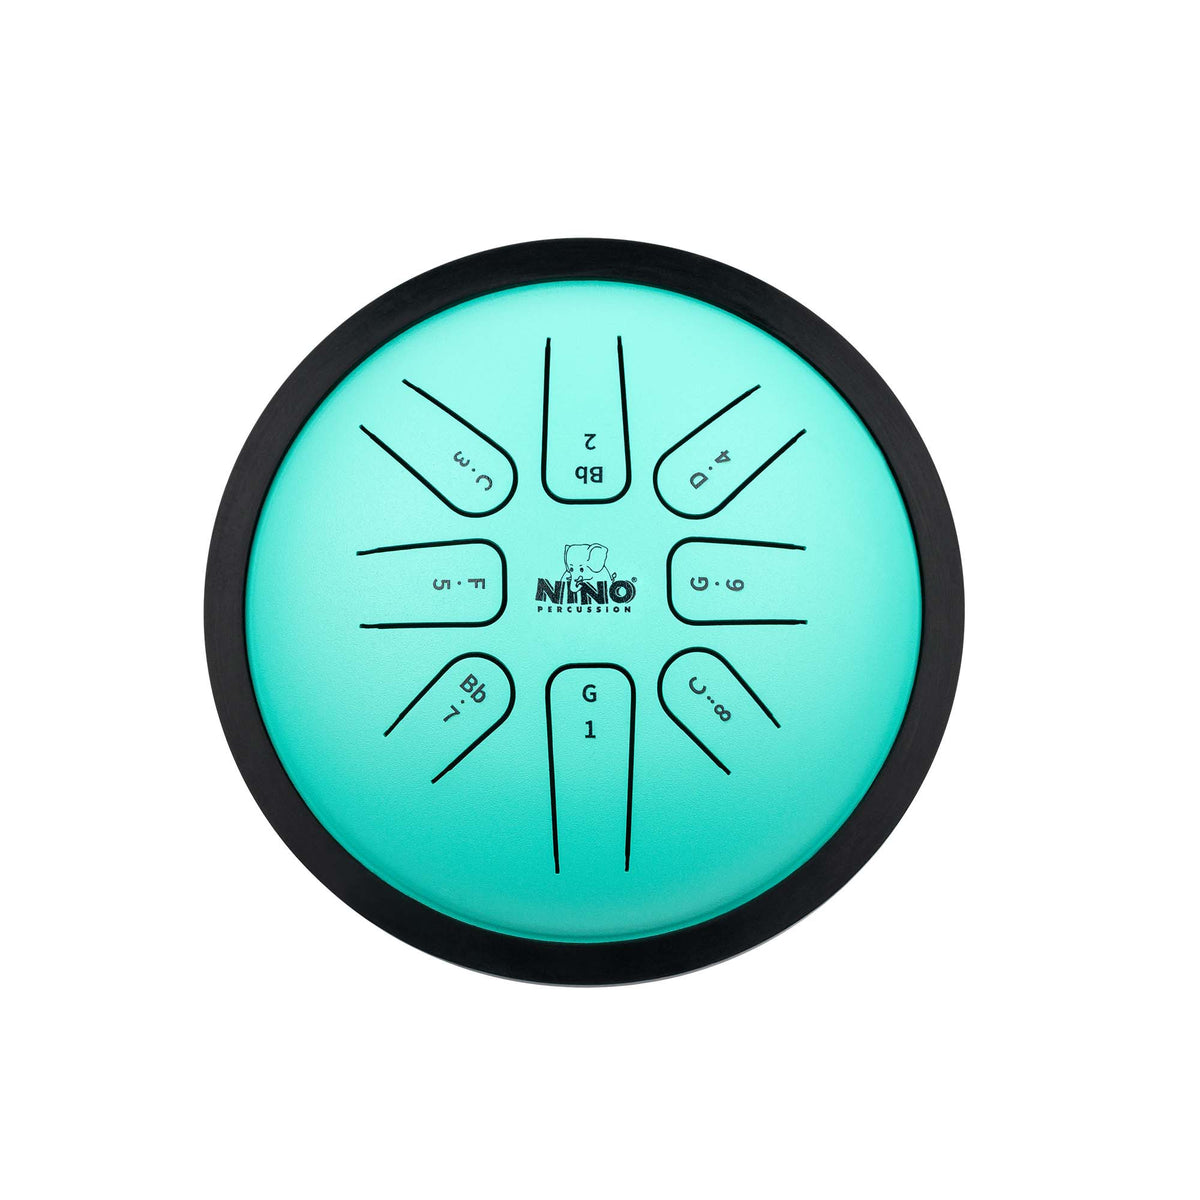 Small Steel Tongue Drum Mint